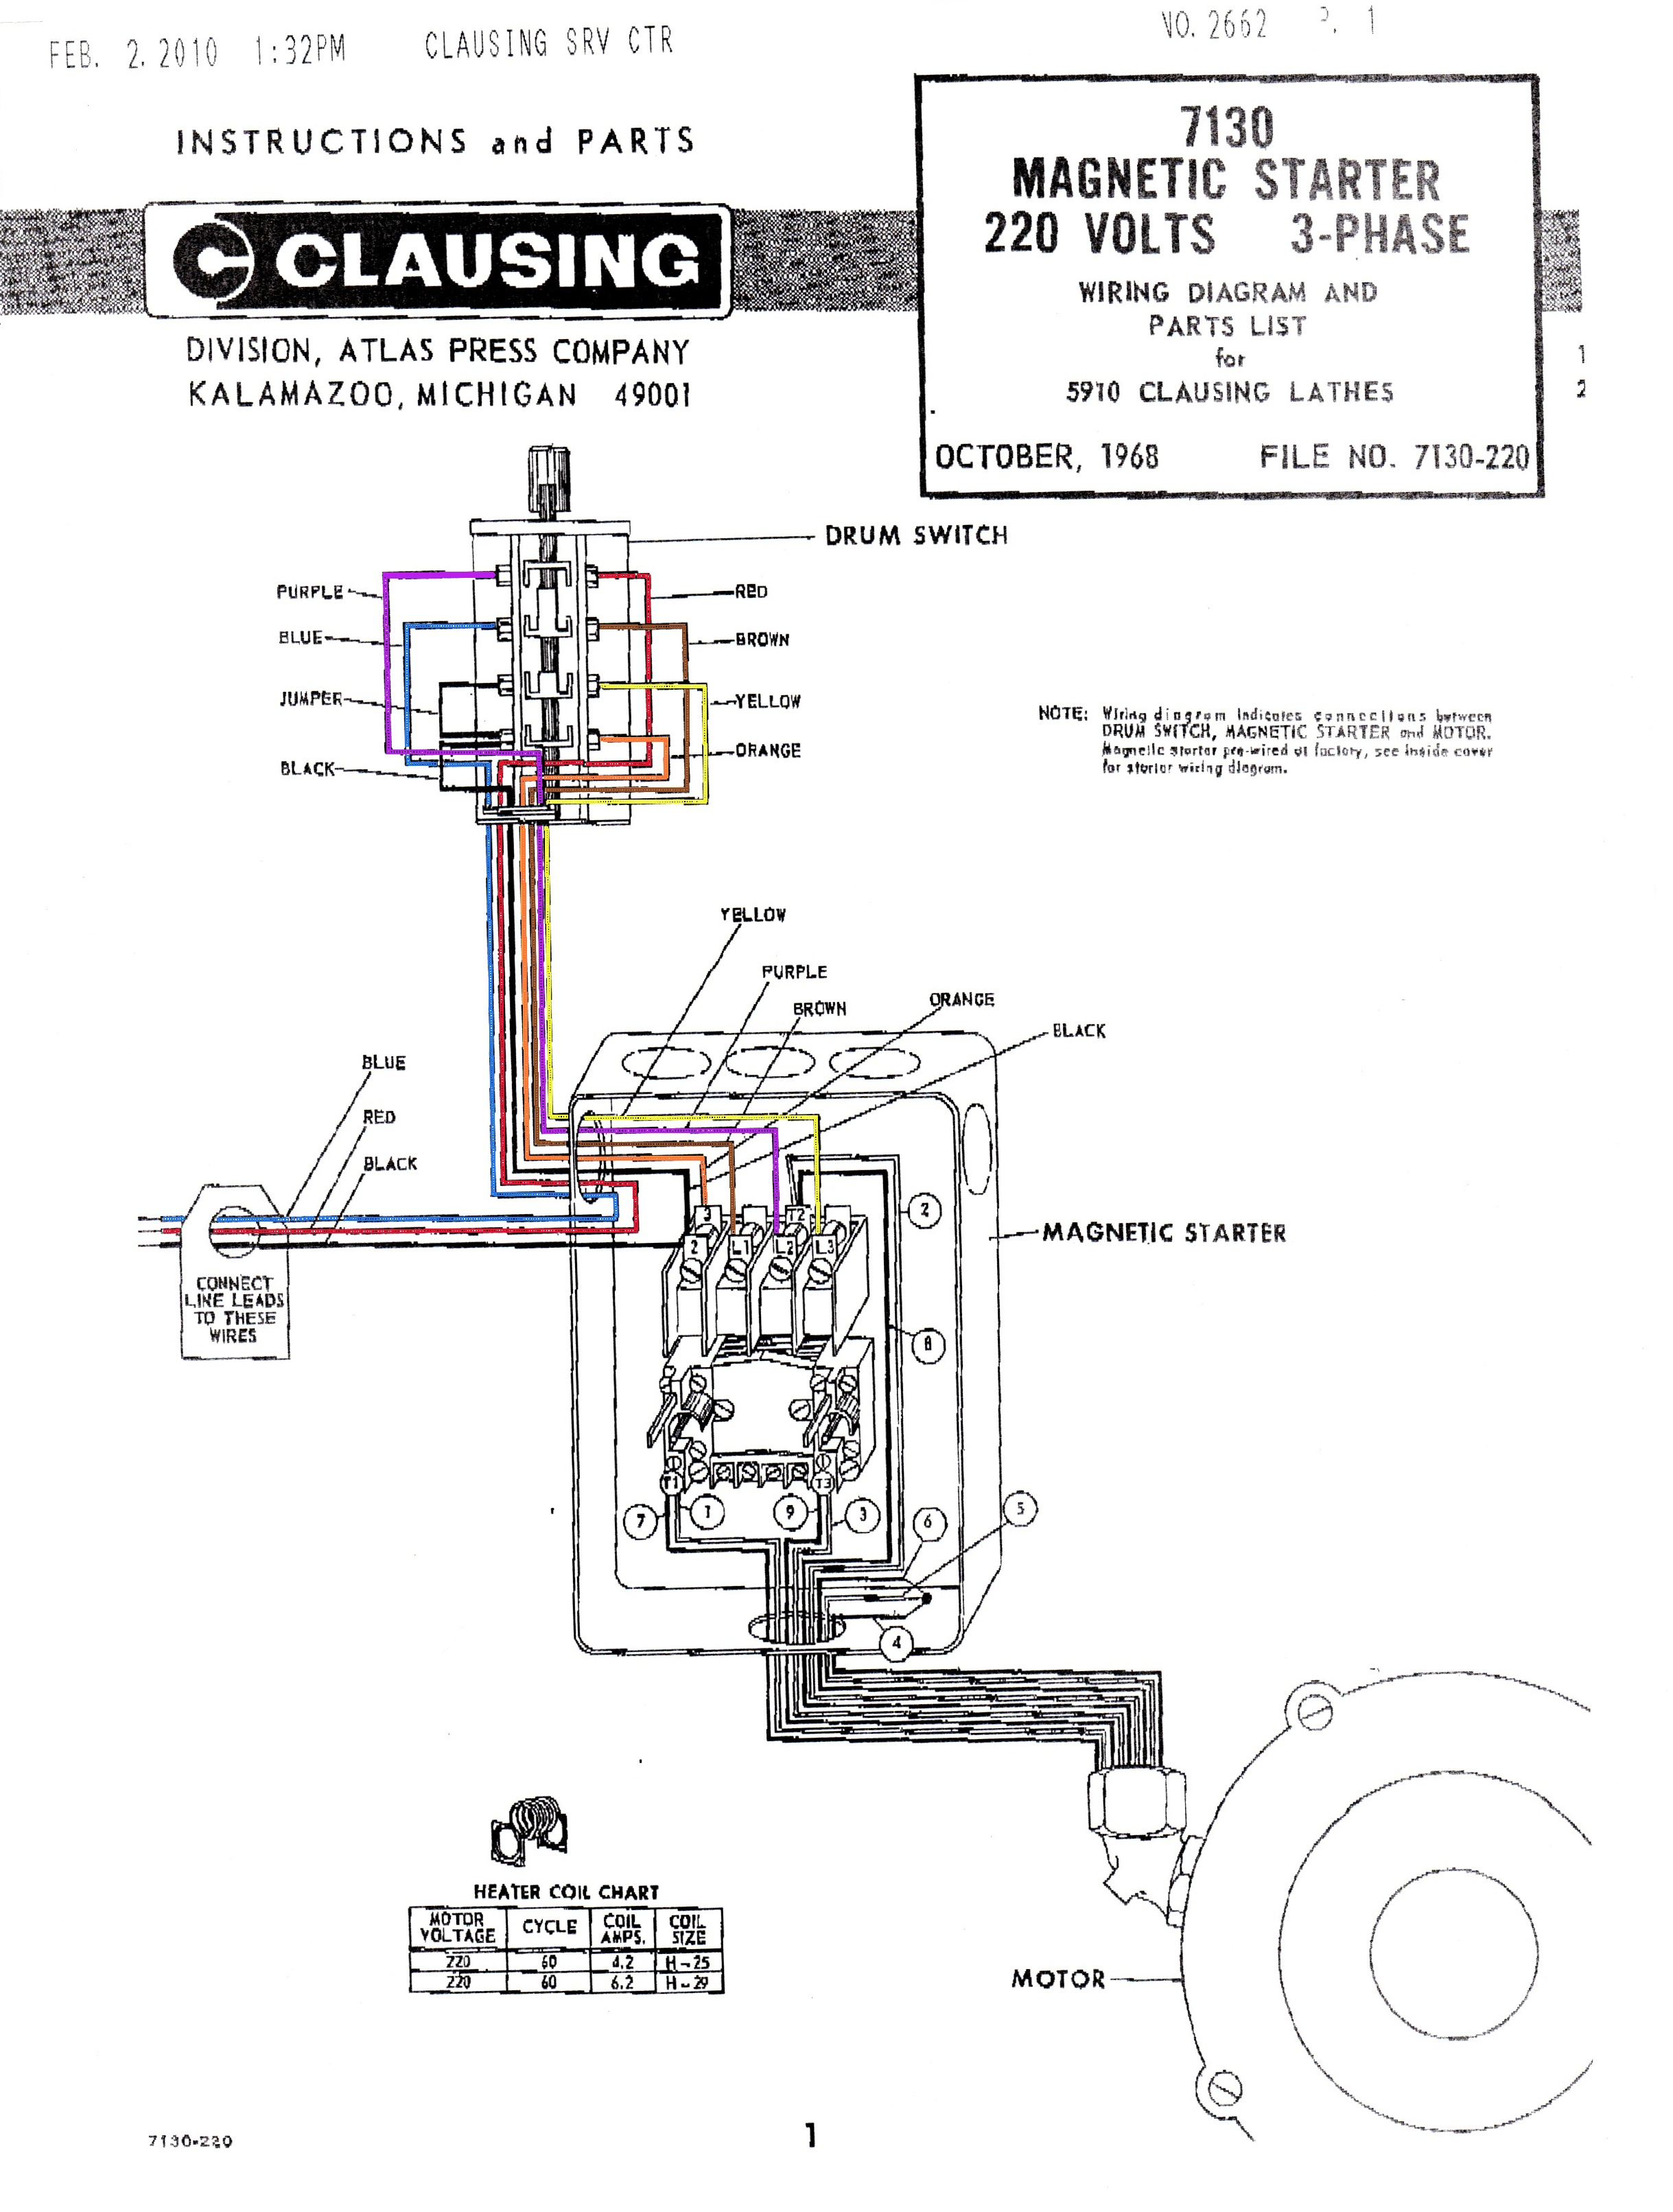 Magnetic Starter Wiring Diagram For 220 | Wiring Diagram - 3 Phase Motor Starter Wiring Diagram